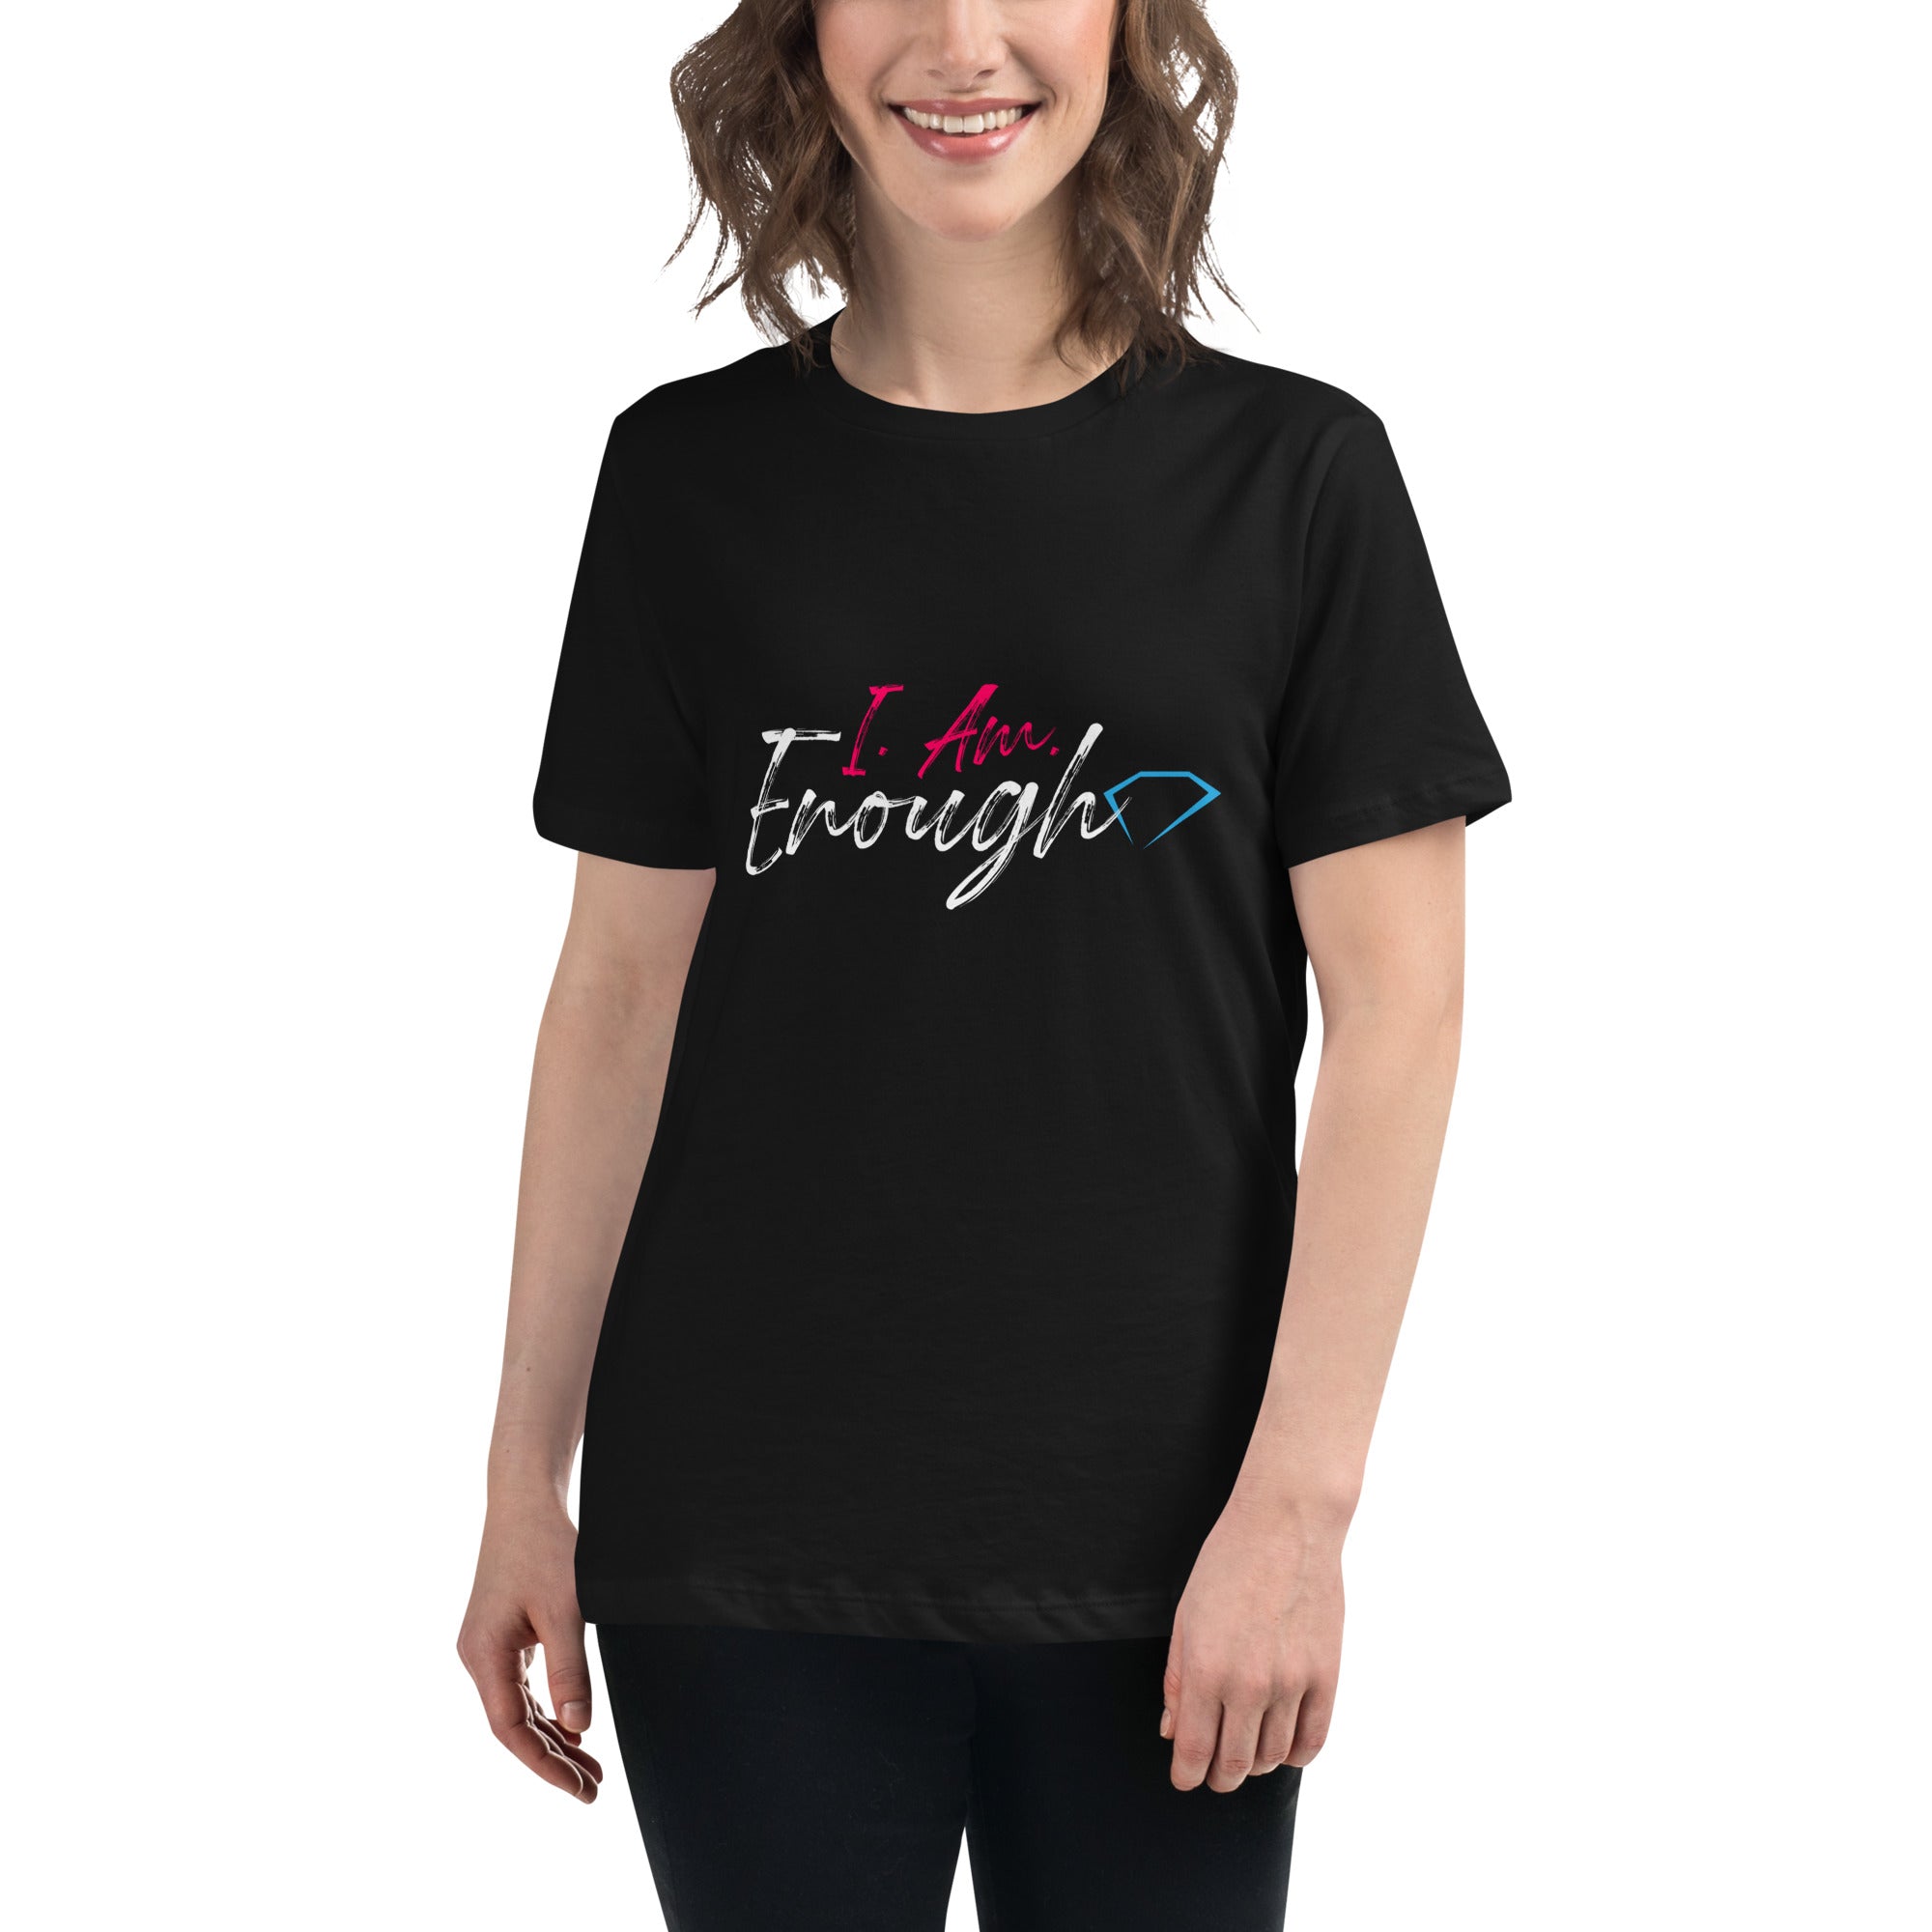 I am Enough Women's Relaxed T-Shirt (On Demand Printing)